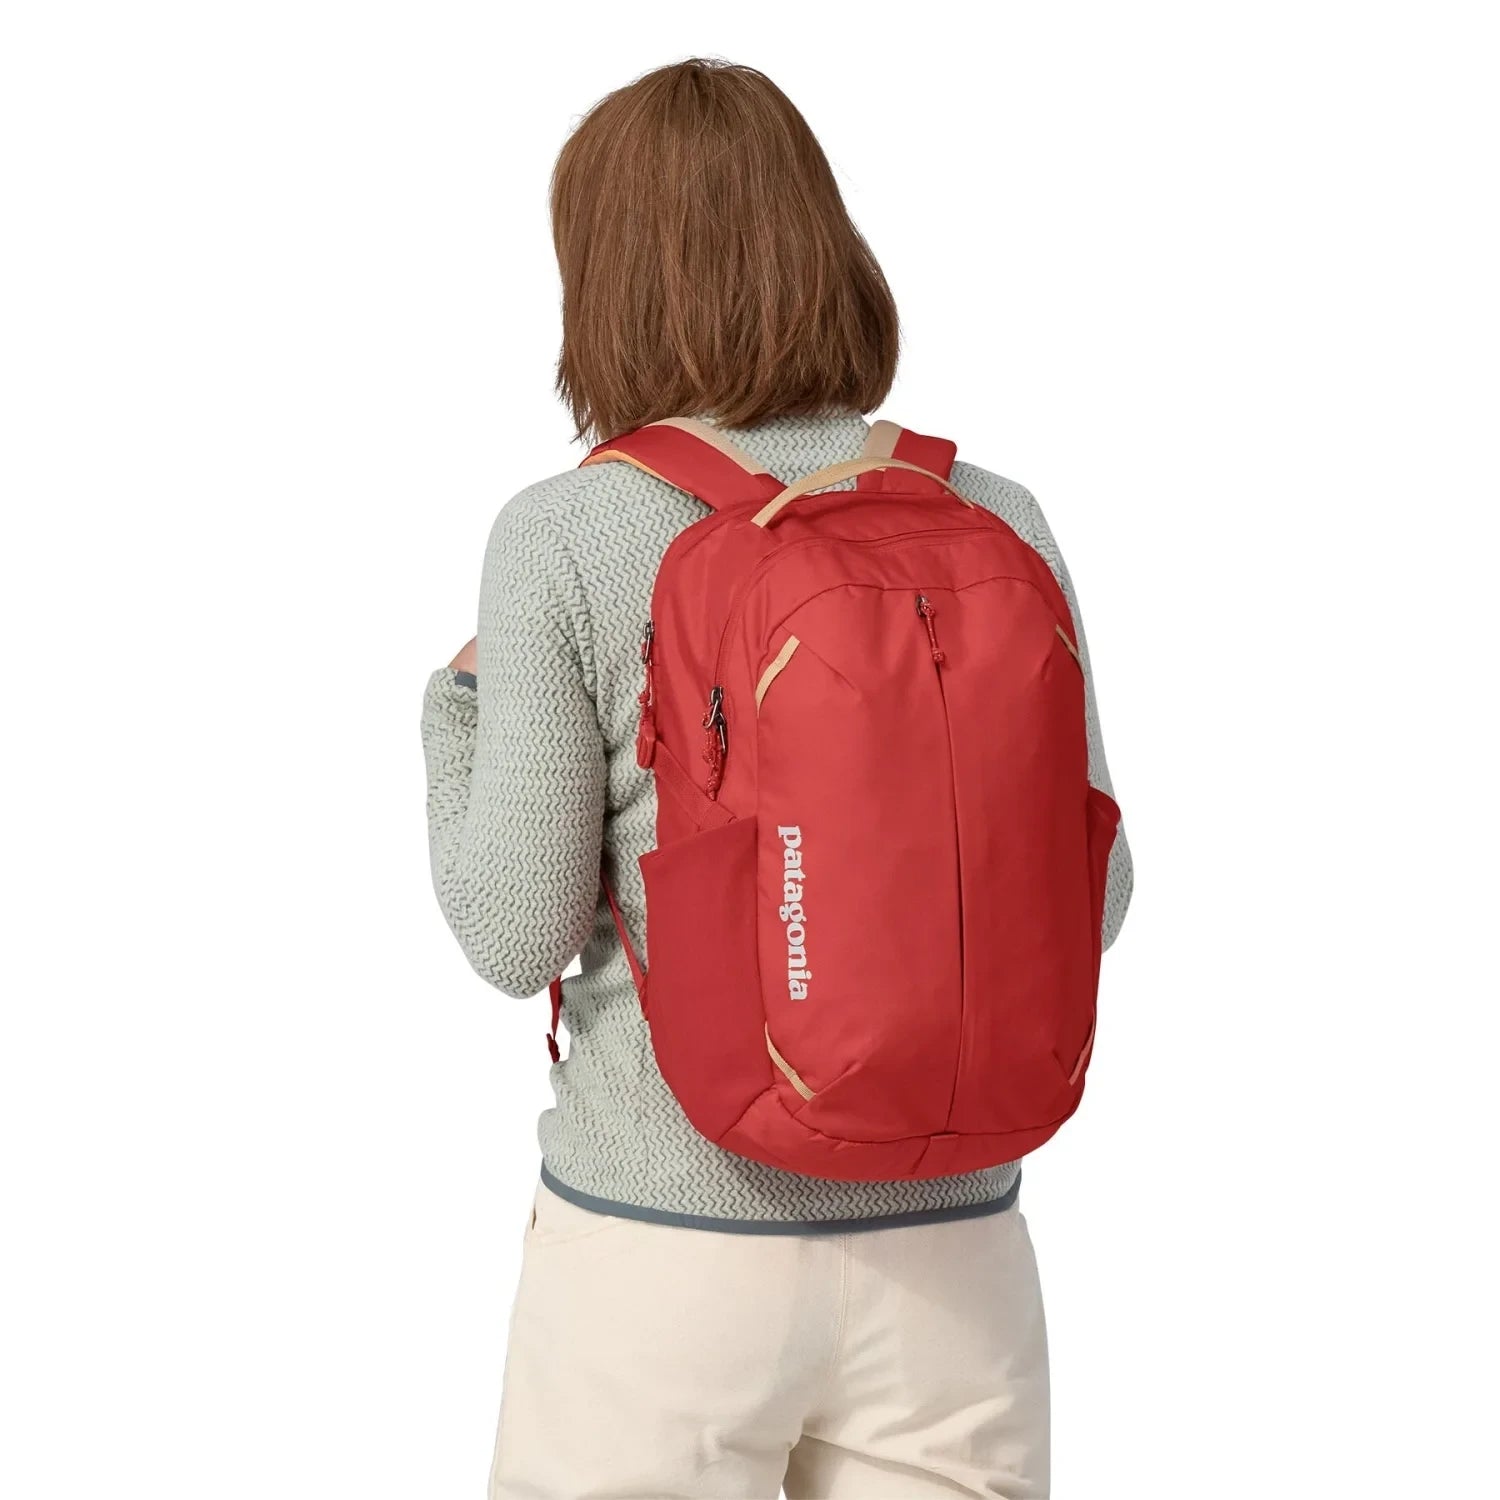 Patagonia 18. PACKS - DAYBAG Refugio Day Pack 26L TGRD TOURING RED